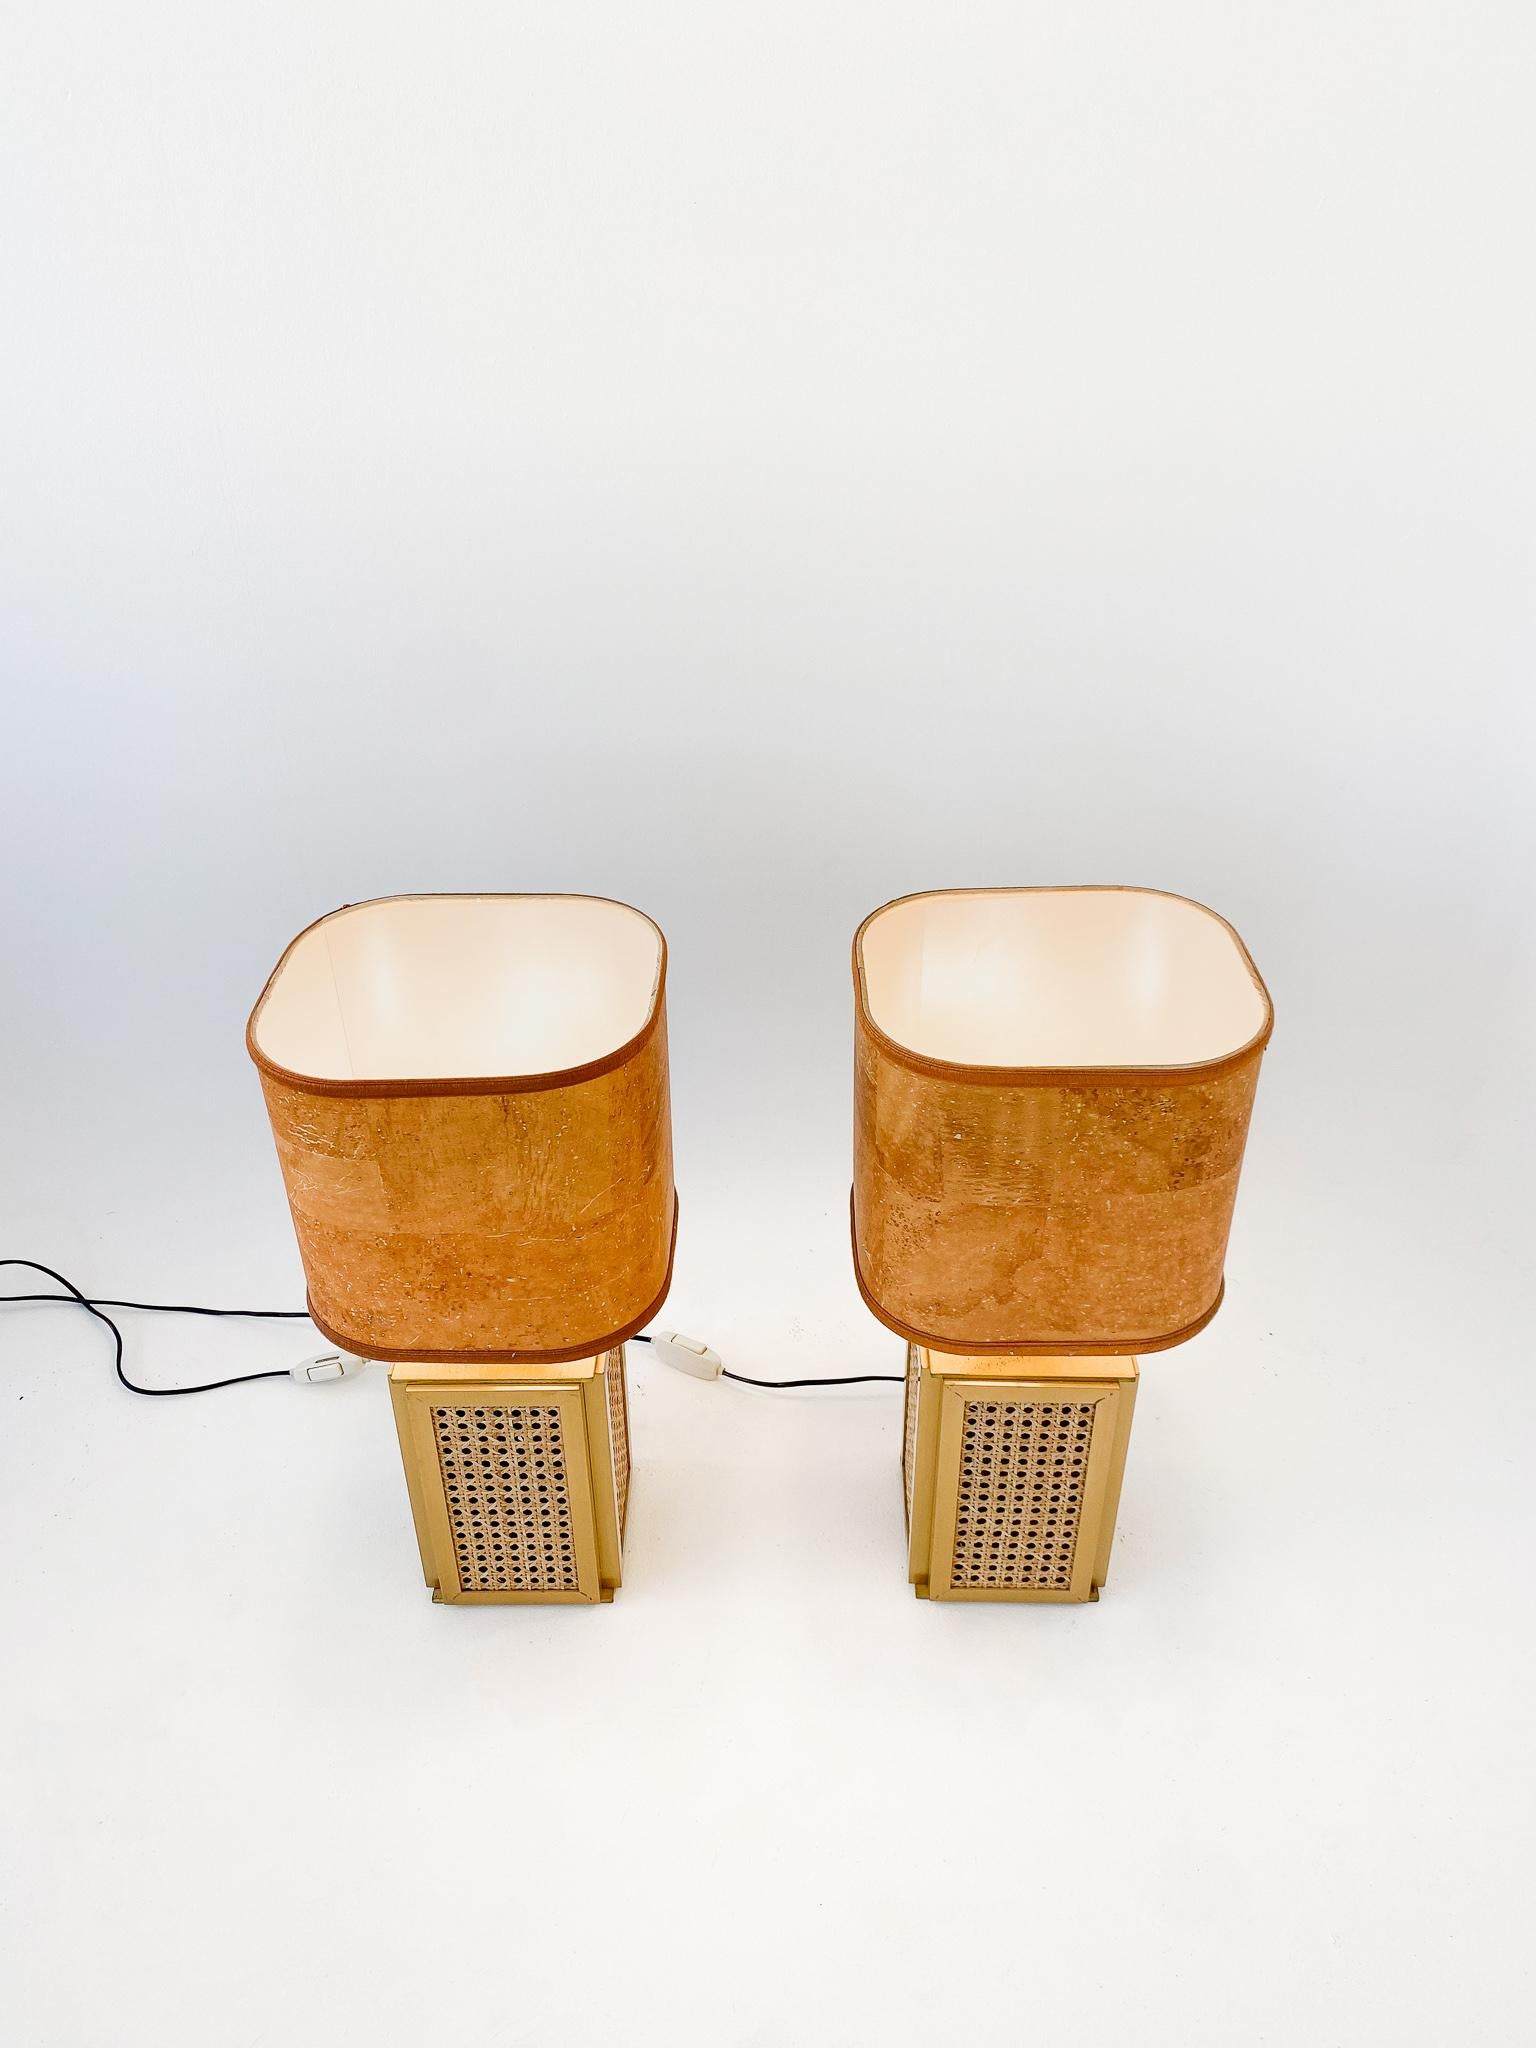 Late 20th Century Mid Century Modern Table Lamps Cork Shade, Brass and Cane Base, Italy, 1970s For Sale